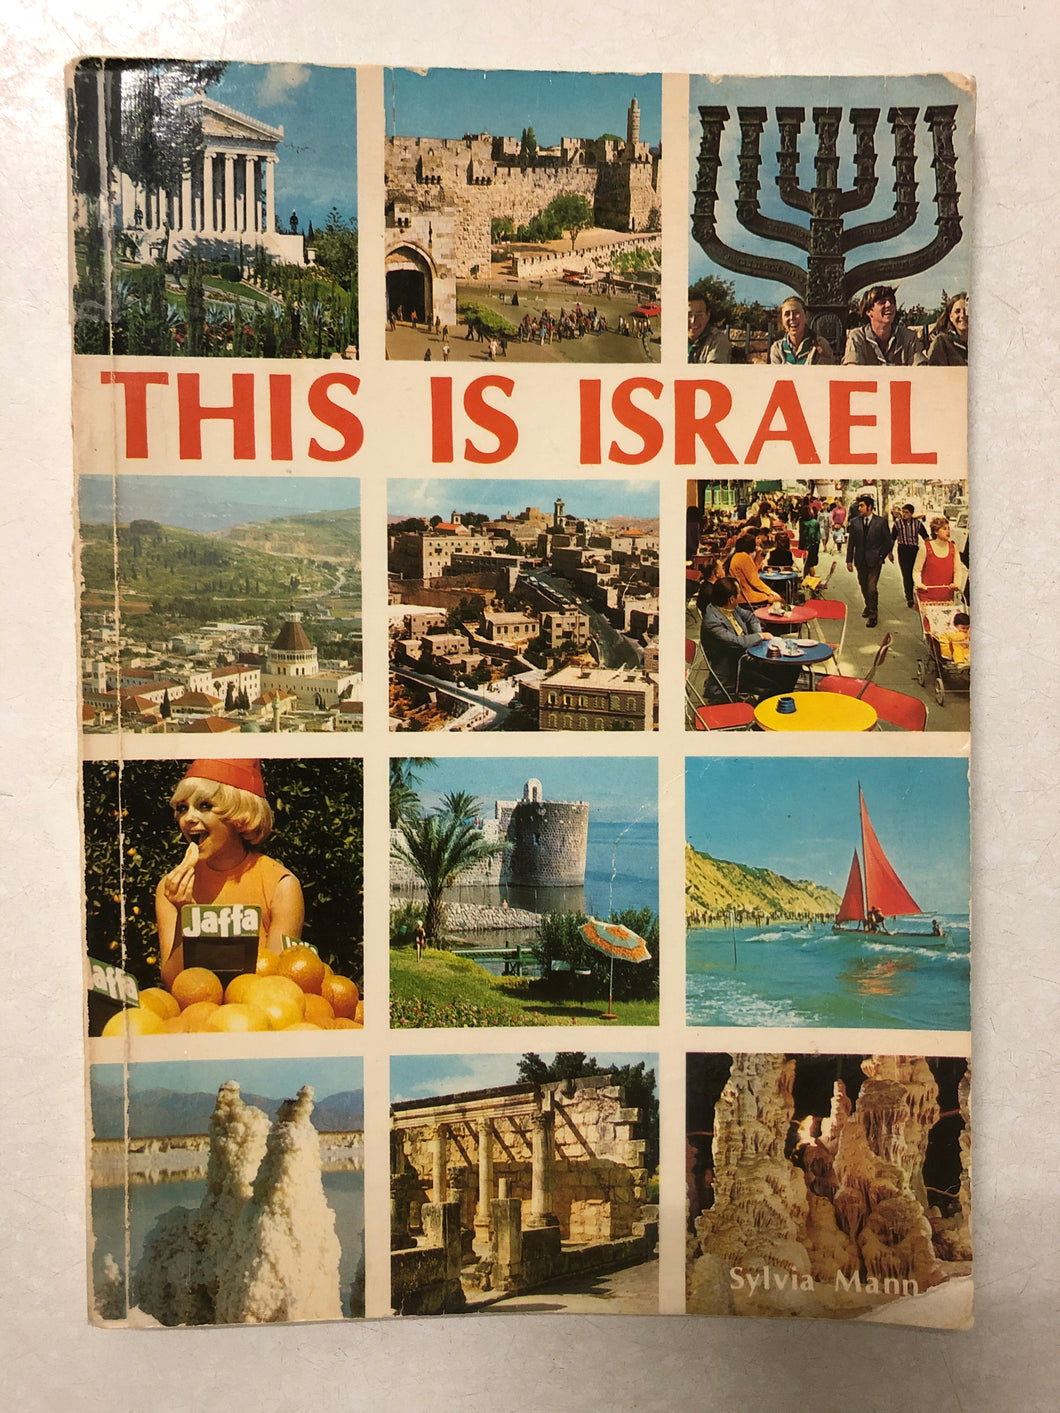 This Is Israel Pictorial Guide & Souvenir - Slick Cat Books 